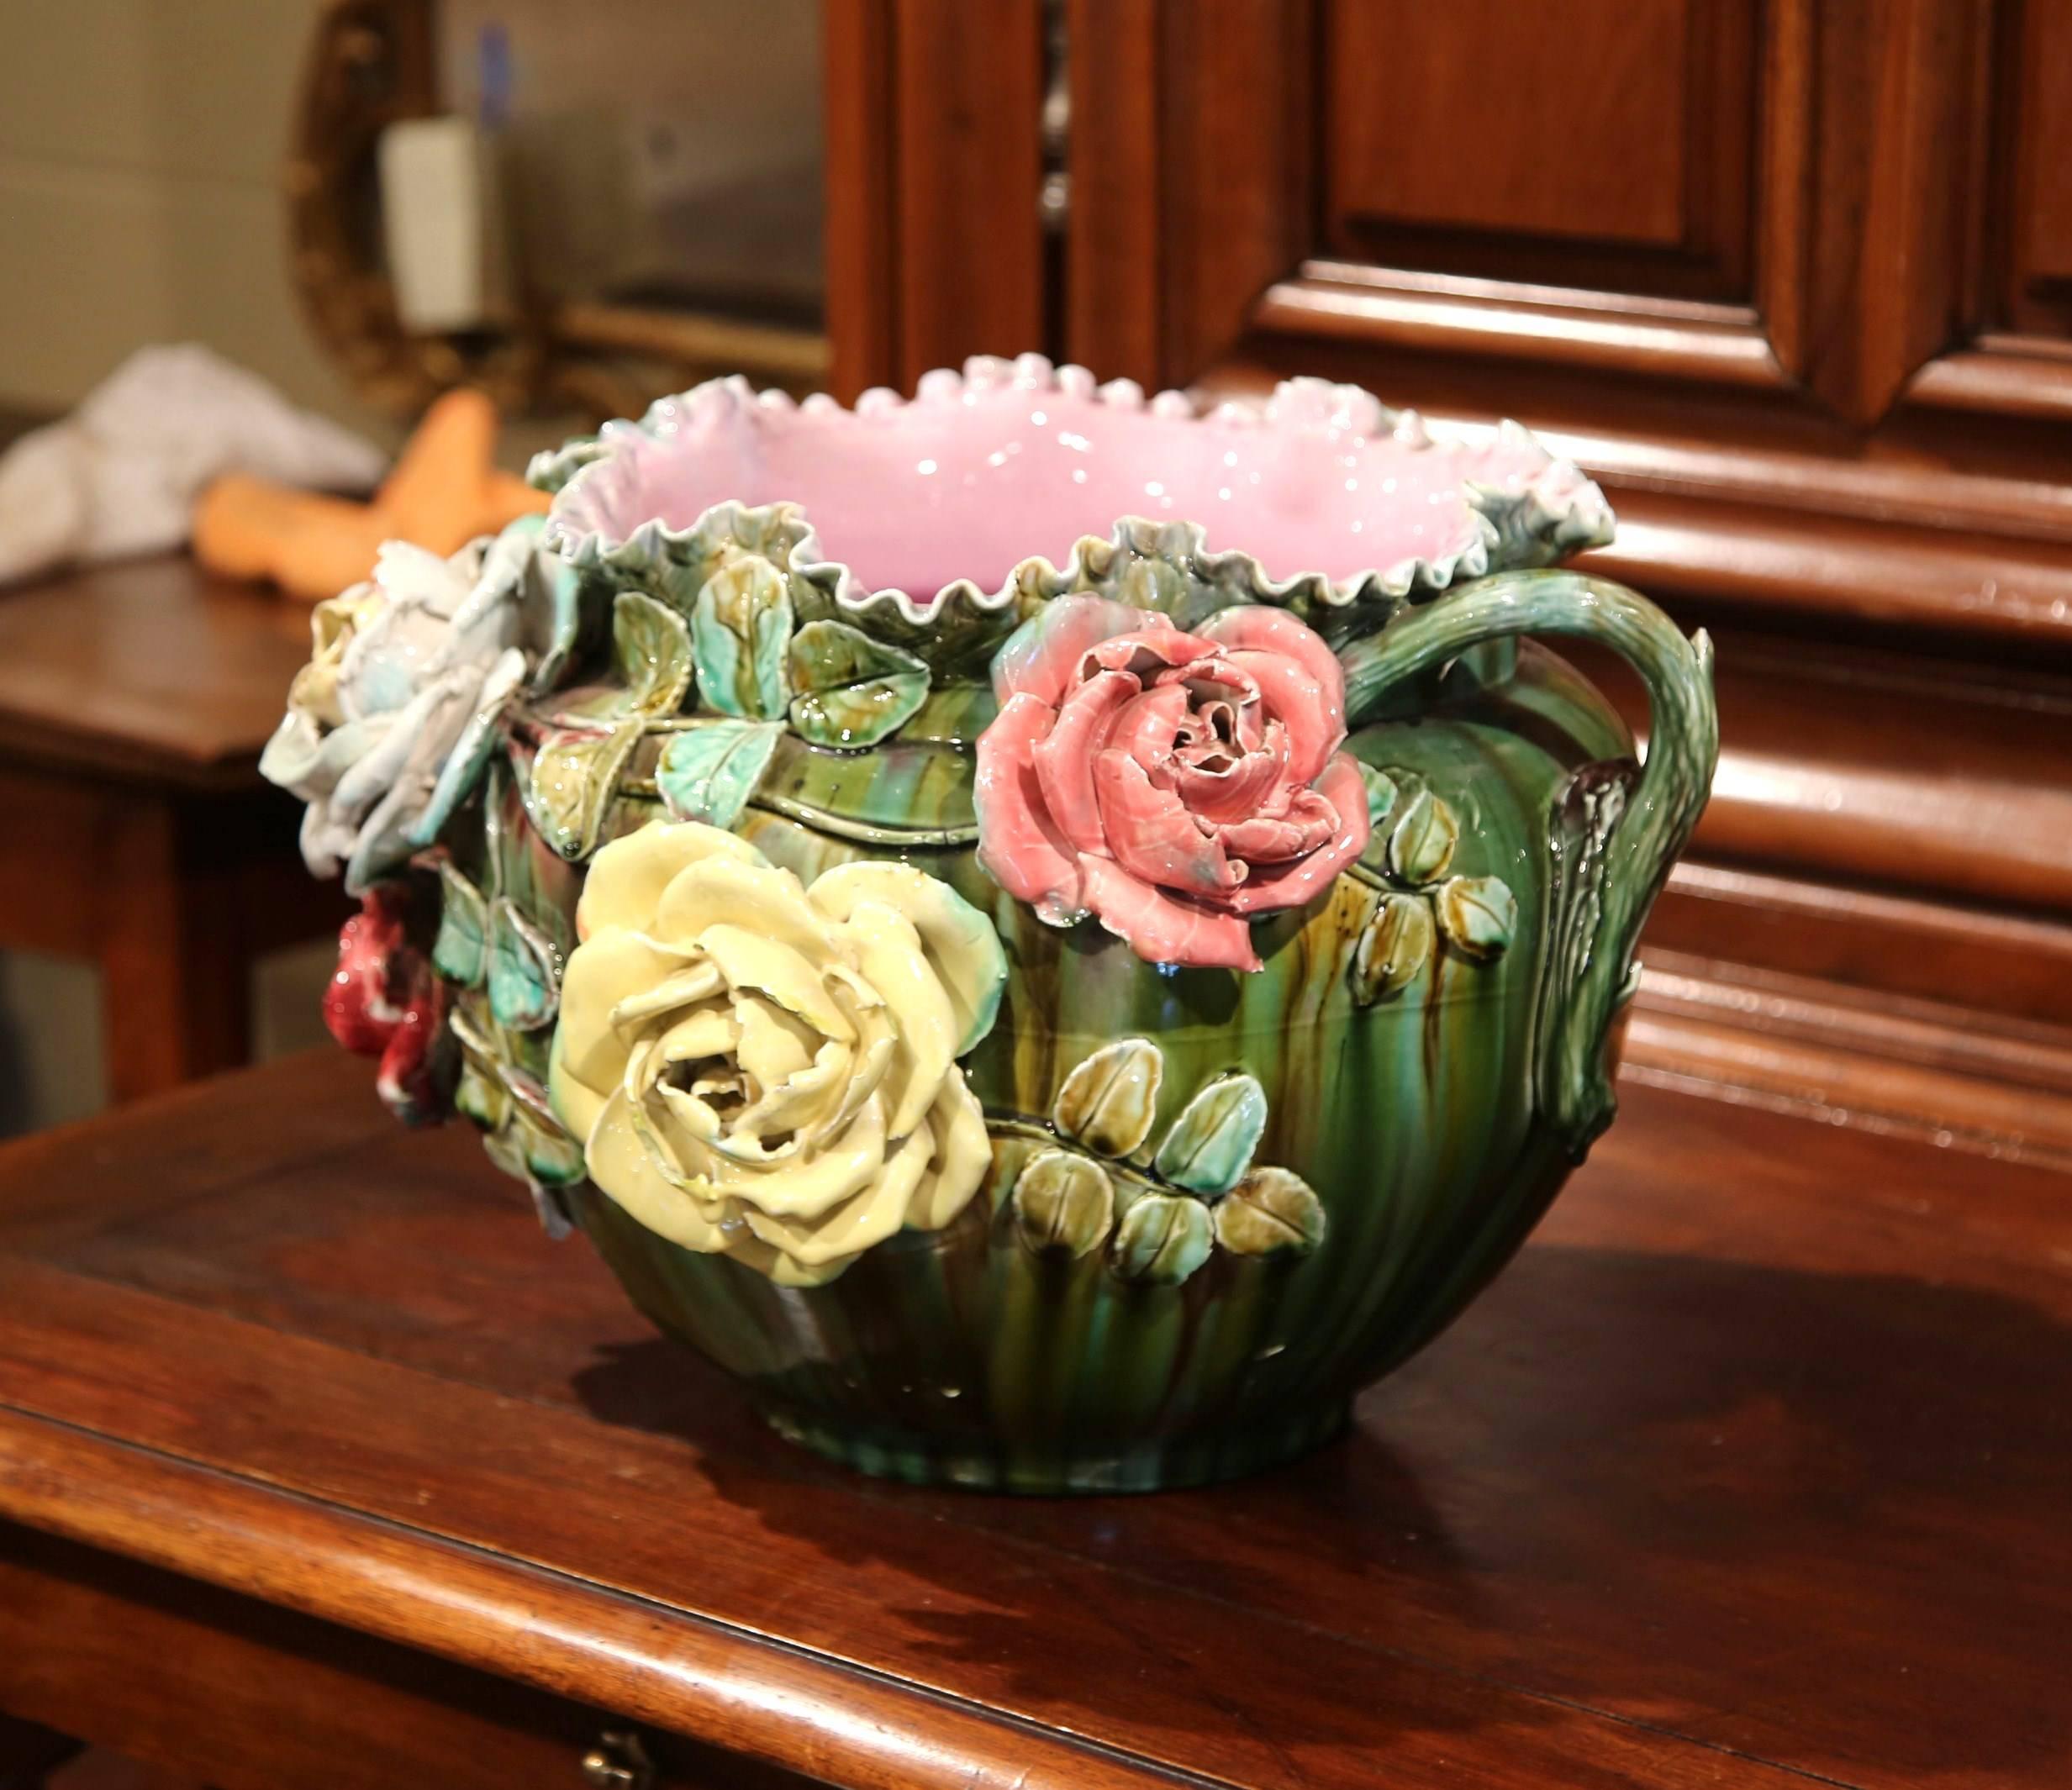 This large, antique Majolica planter was crafted in France, circa 1890. The decorative porcelain cachepot with scalloped edge features four colorful, high relief roses embellished with green leaves. The round, ceramic jardiniere is painted in a